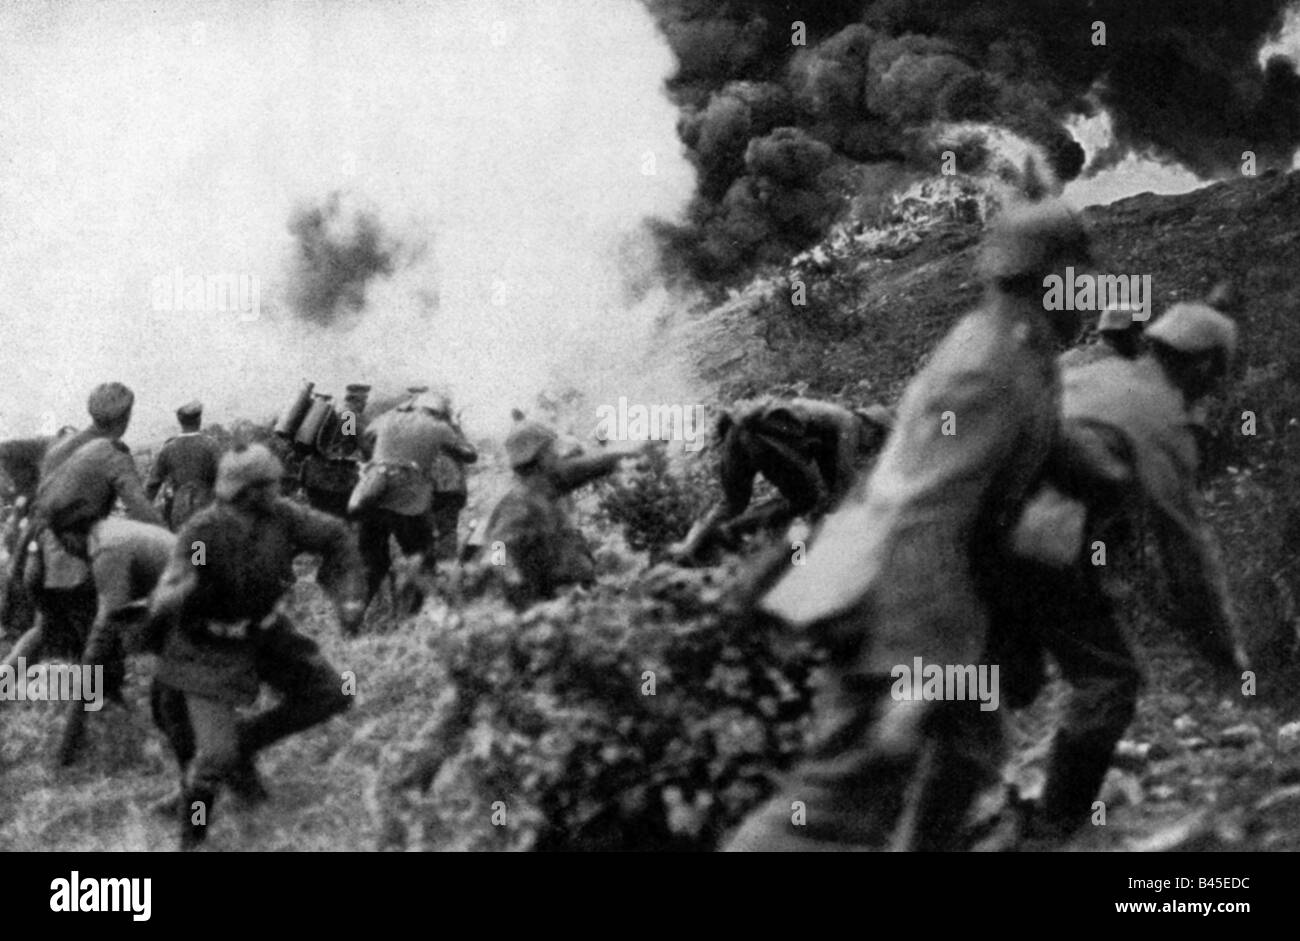 events, First World War / WWI, Western Front, Battle of Verdun 1916, German infantery attacking with flamethrower and hand grenades, France, 15.3.1916, Stock Photo